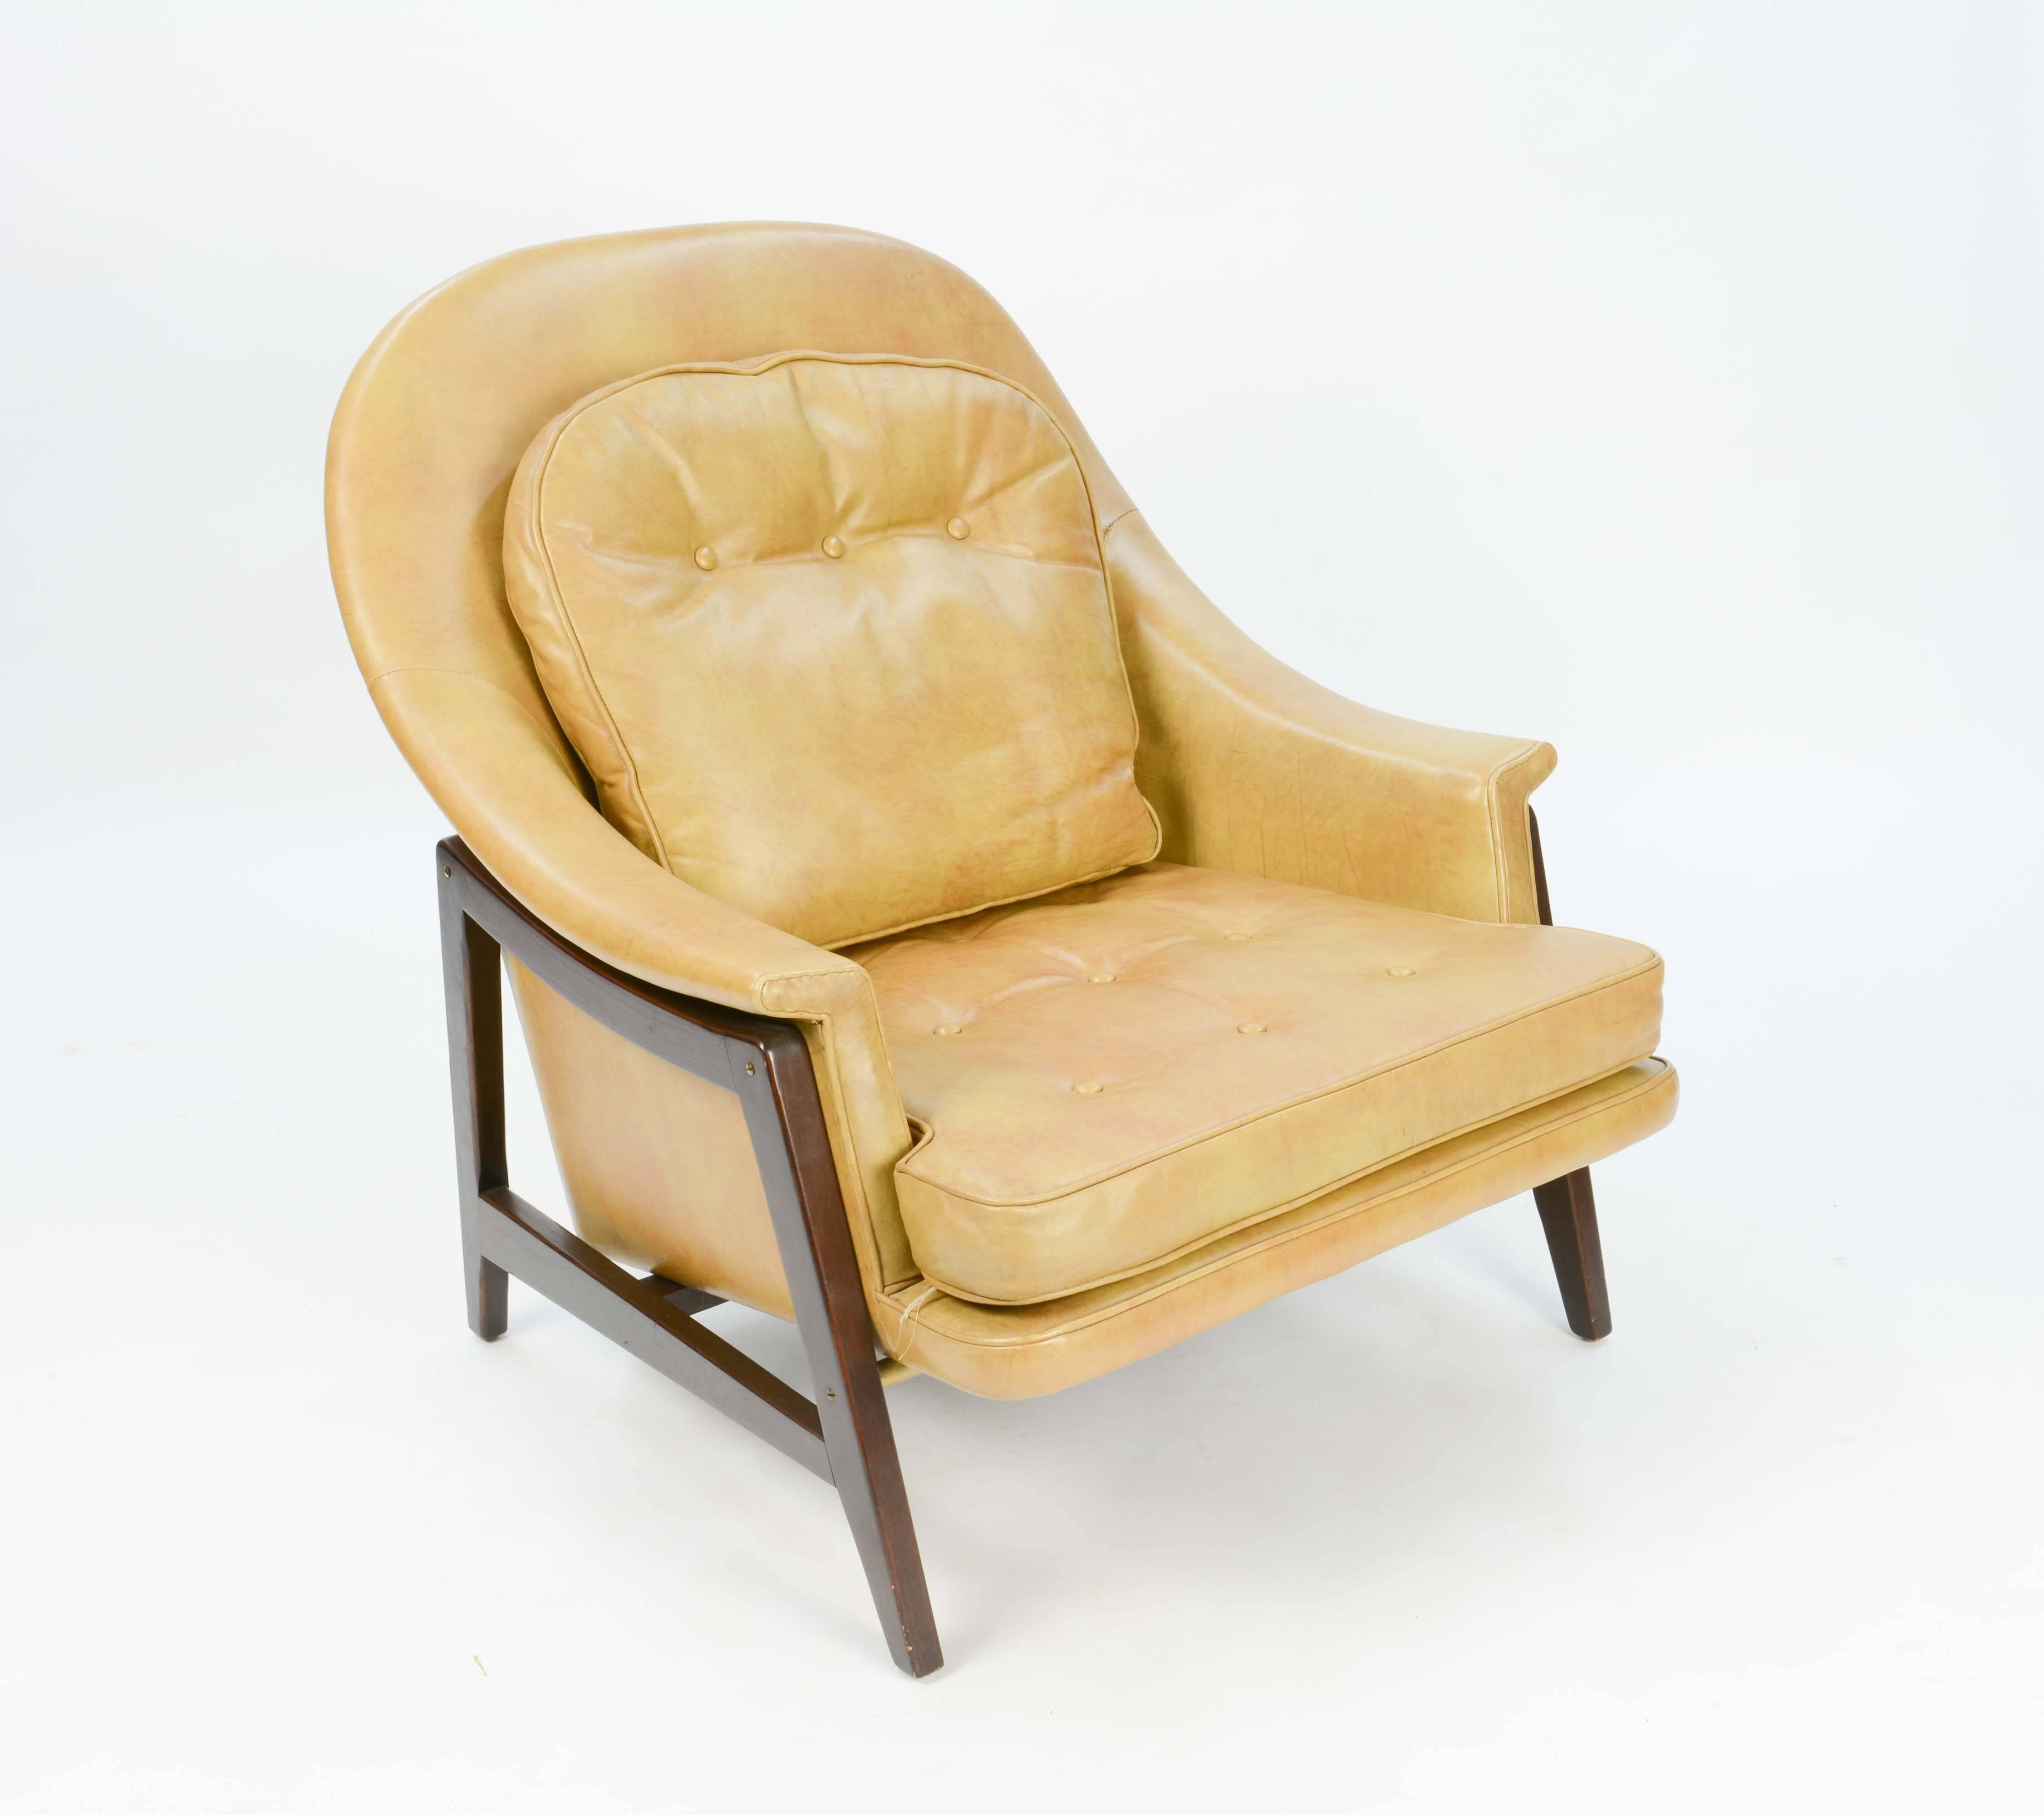 Mid-20th Century Edward Wormley's Signature Janus Group Club Chair and Ottoman for Dunbar For Sale